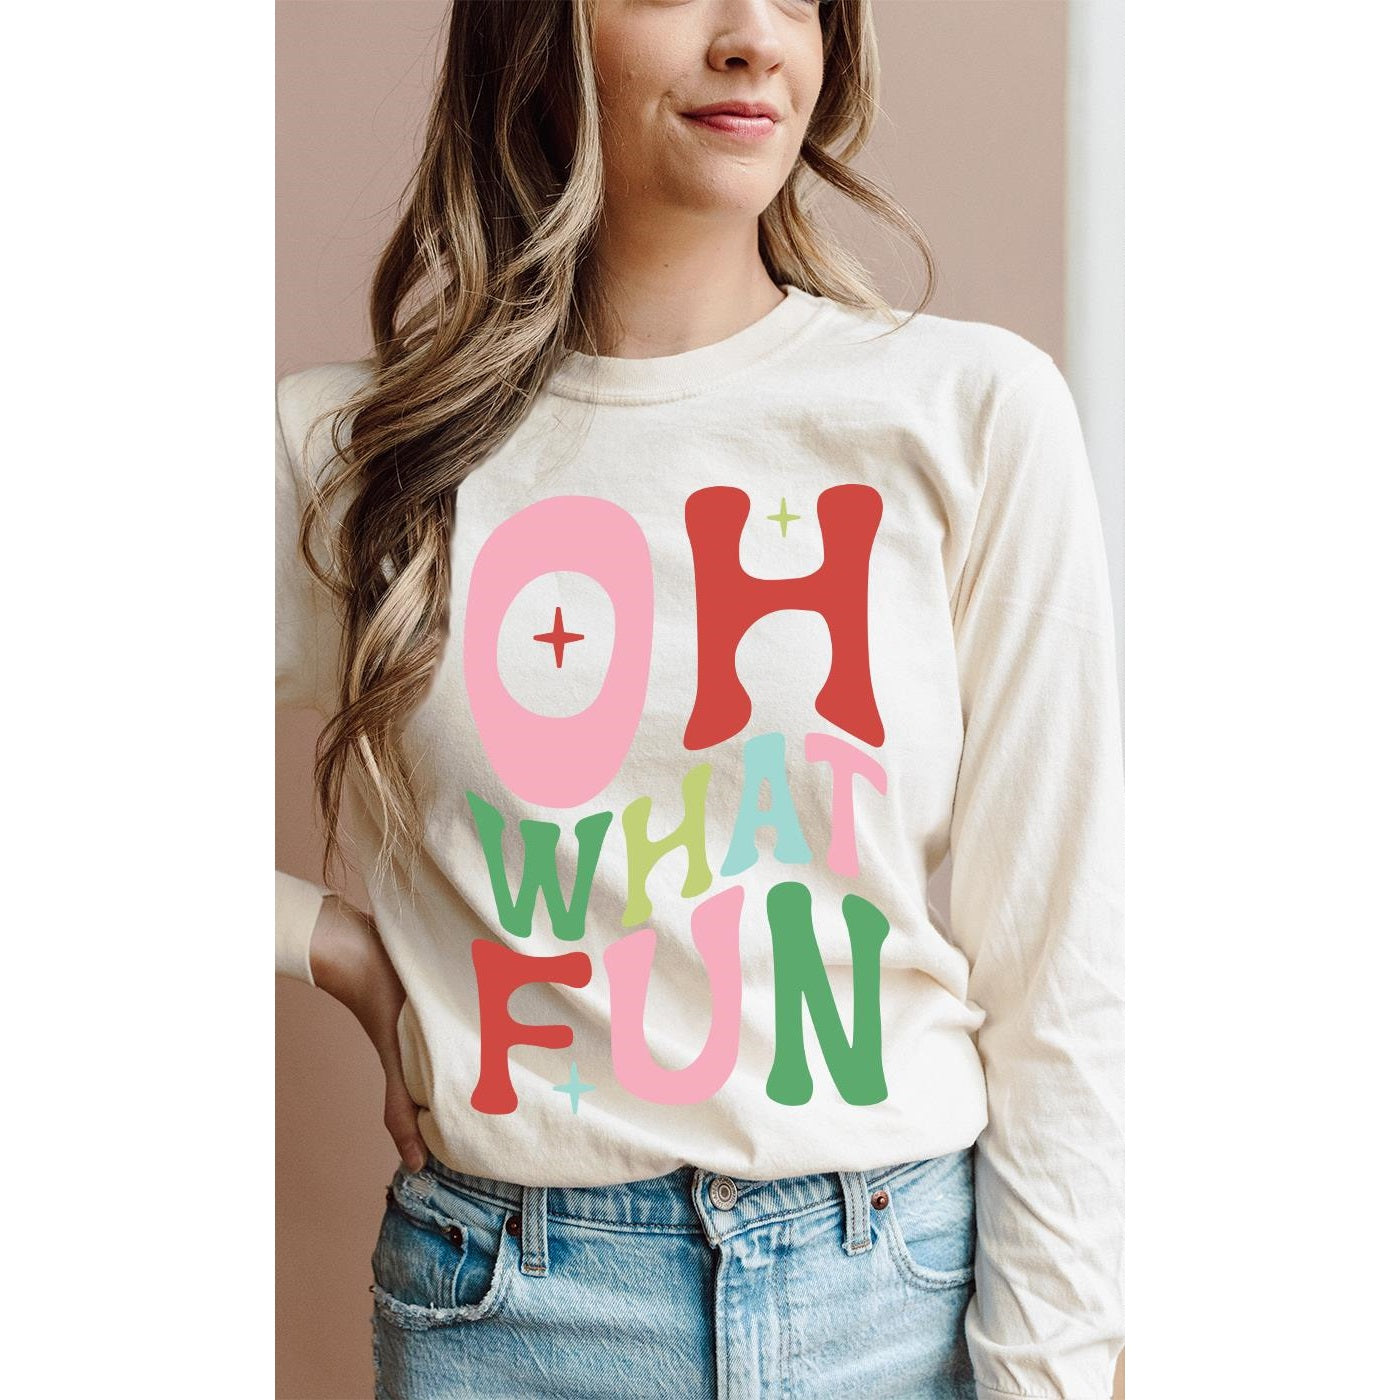 The "OH WHAT FUN" Graphic Long Sleeve